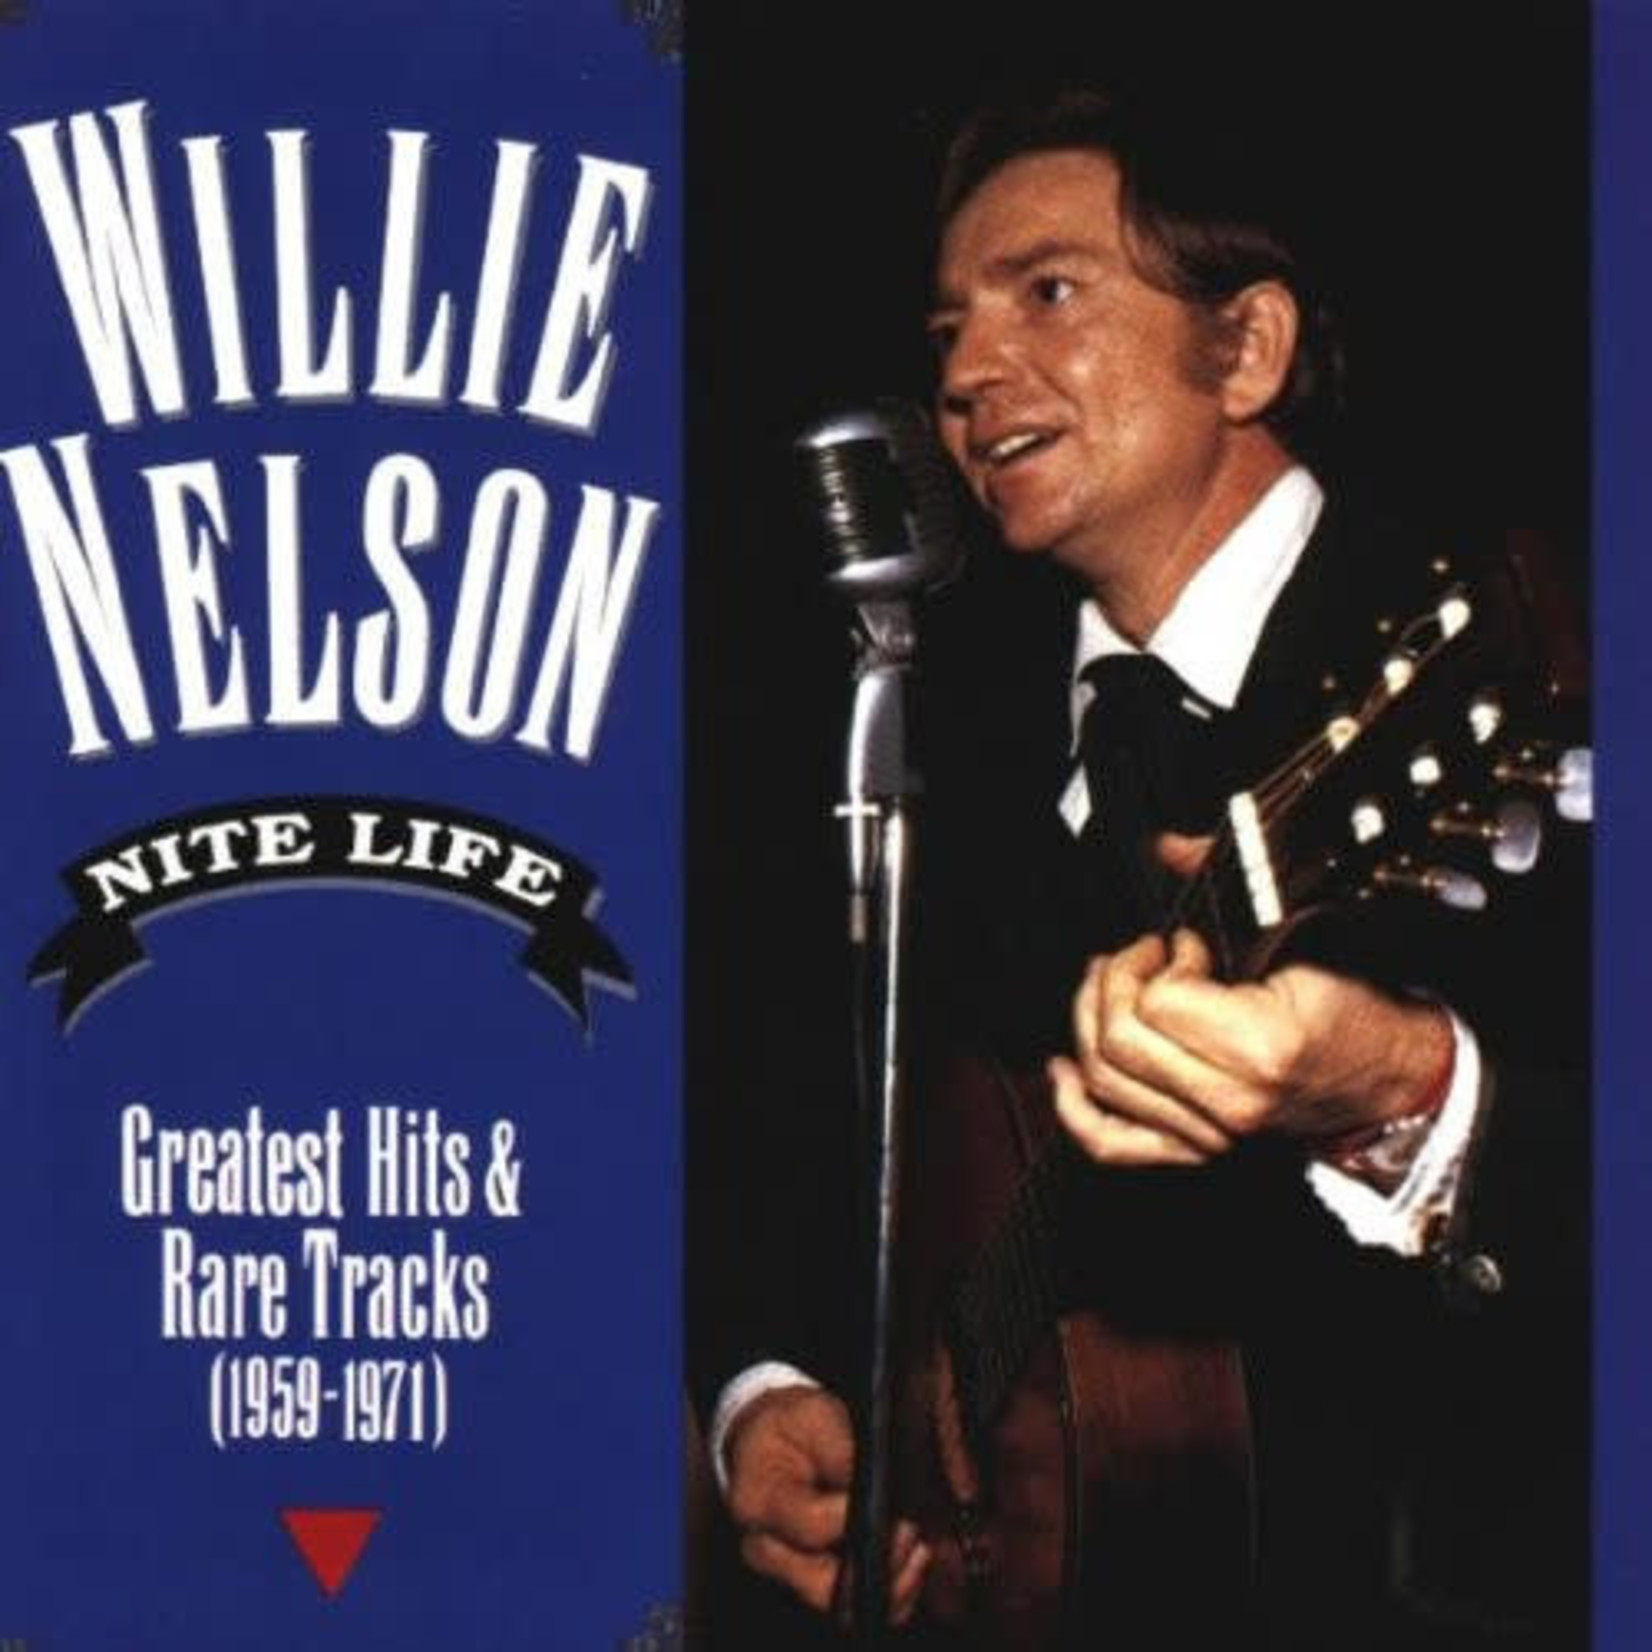 Willie Nelson Willie Nelson – Nite Life: Greatest Hits And Rare Tracks (1959-1971) (CD) NEW UNOPENED